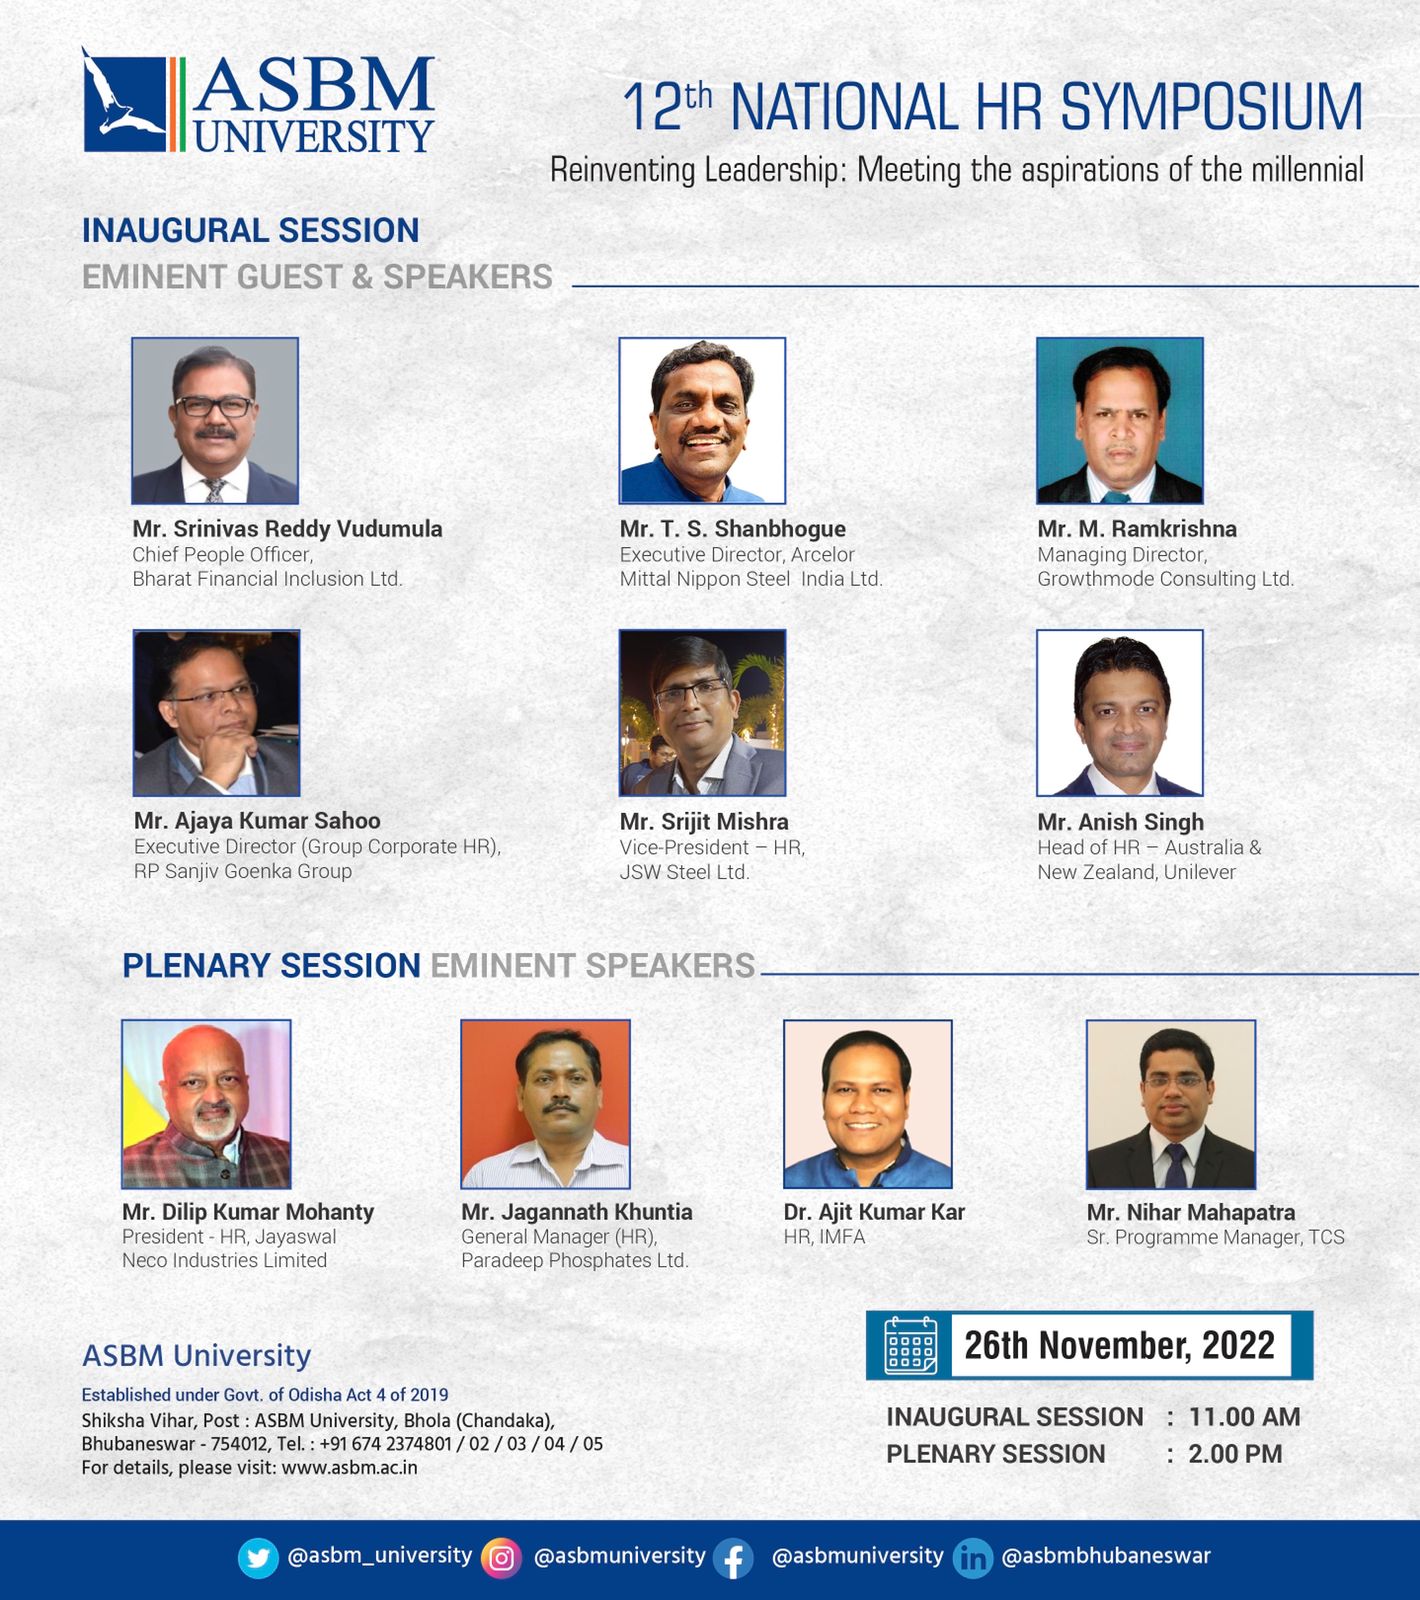 12th NATIONAL HR SYMPOSIUM Reinventing Leadership: “Meeting the aspirations of the millennial”